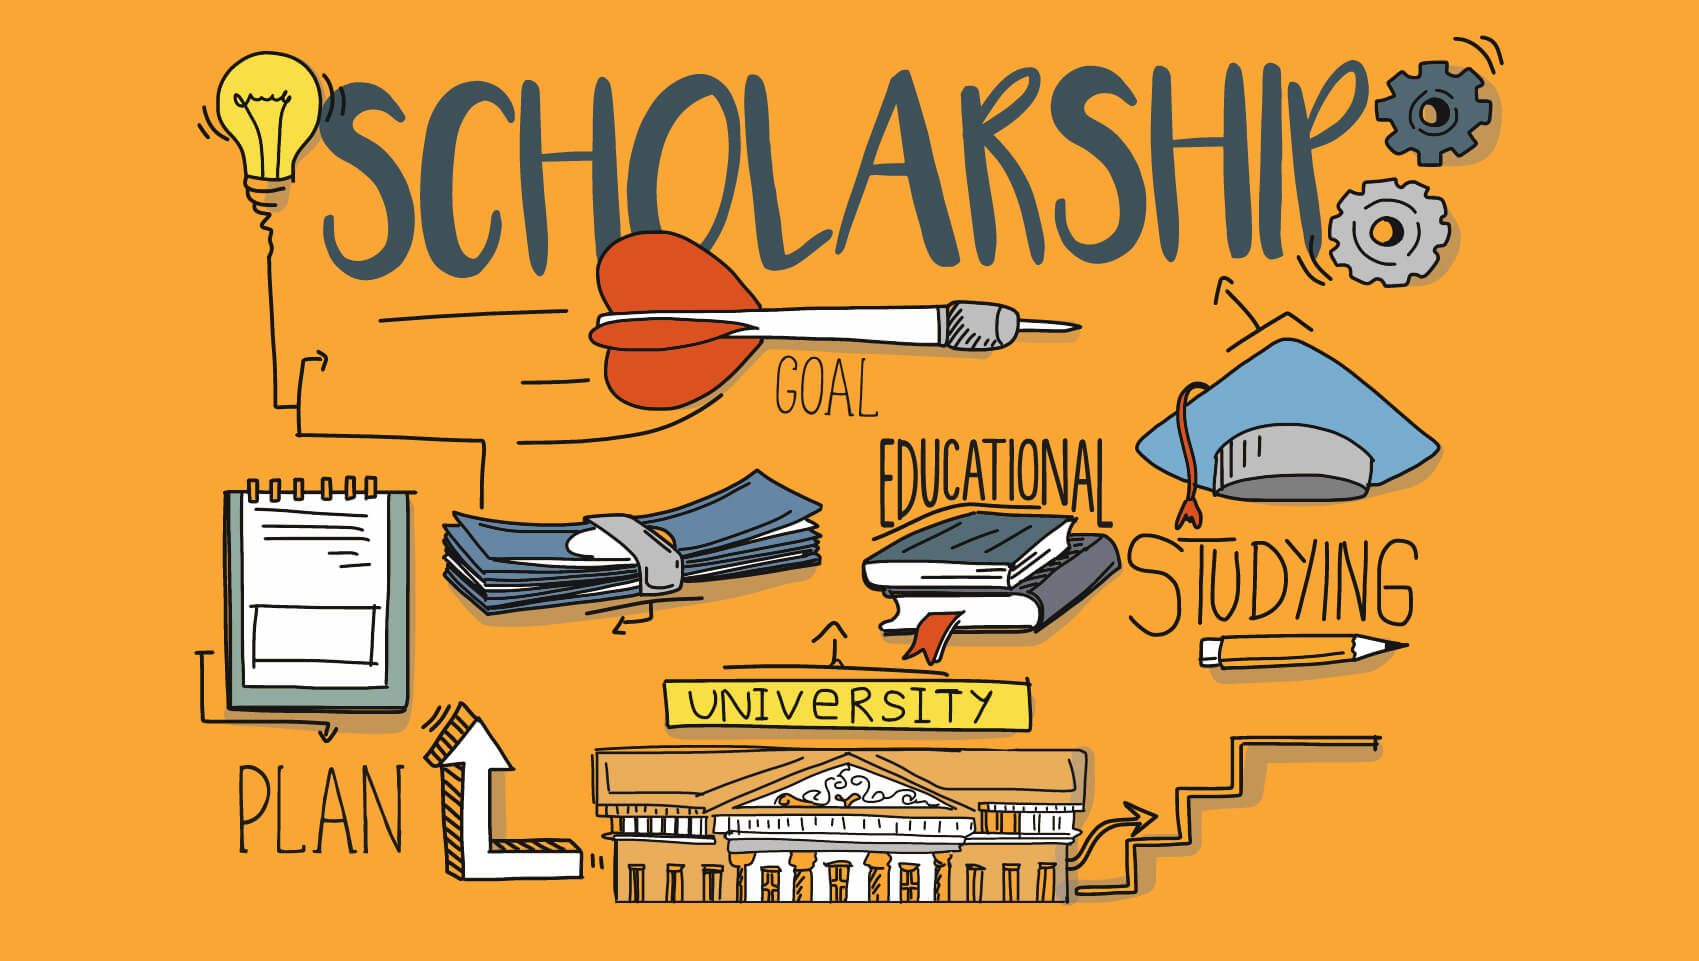 How To Start A Scholarship Essay On Earning A Scholarship And More